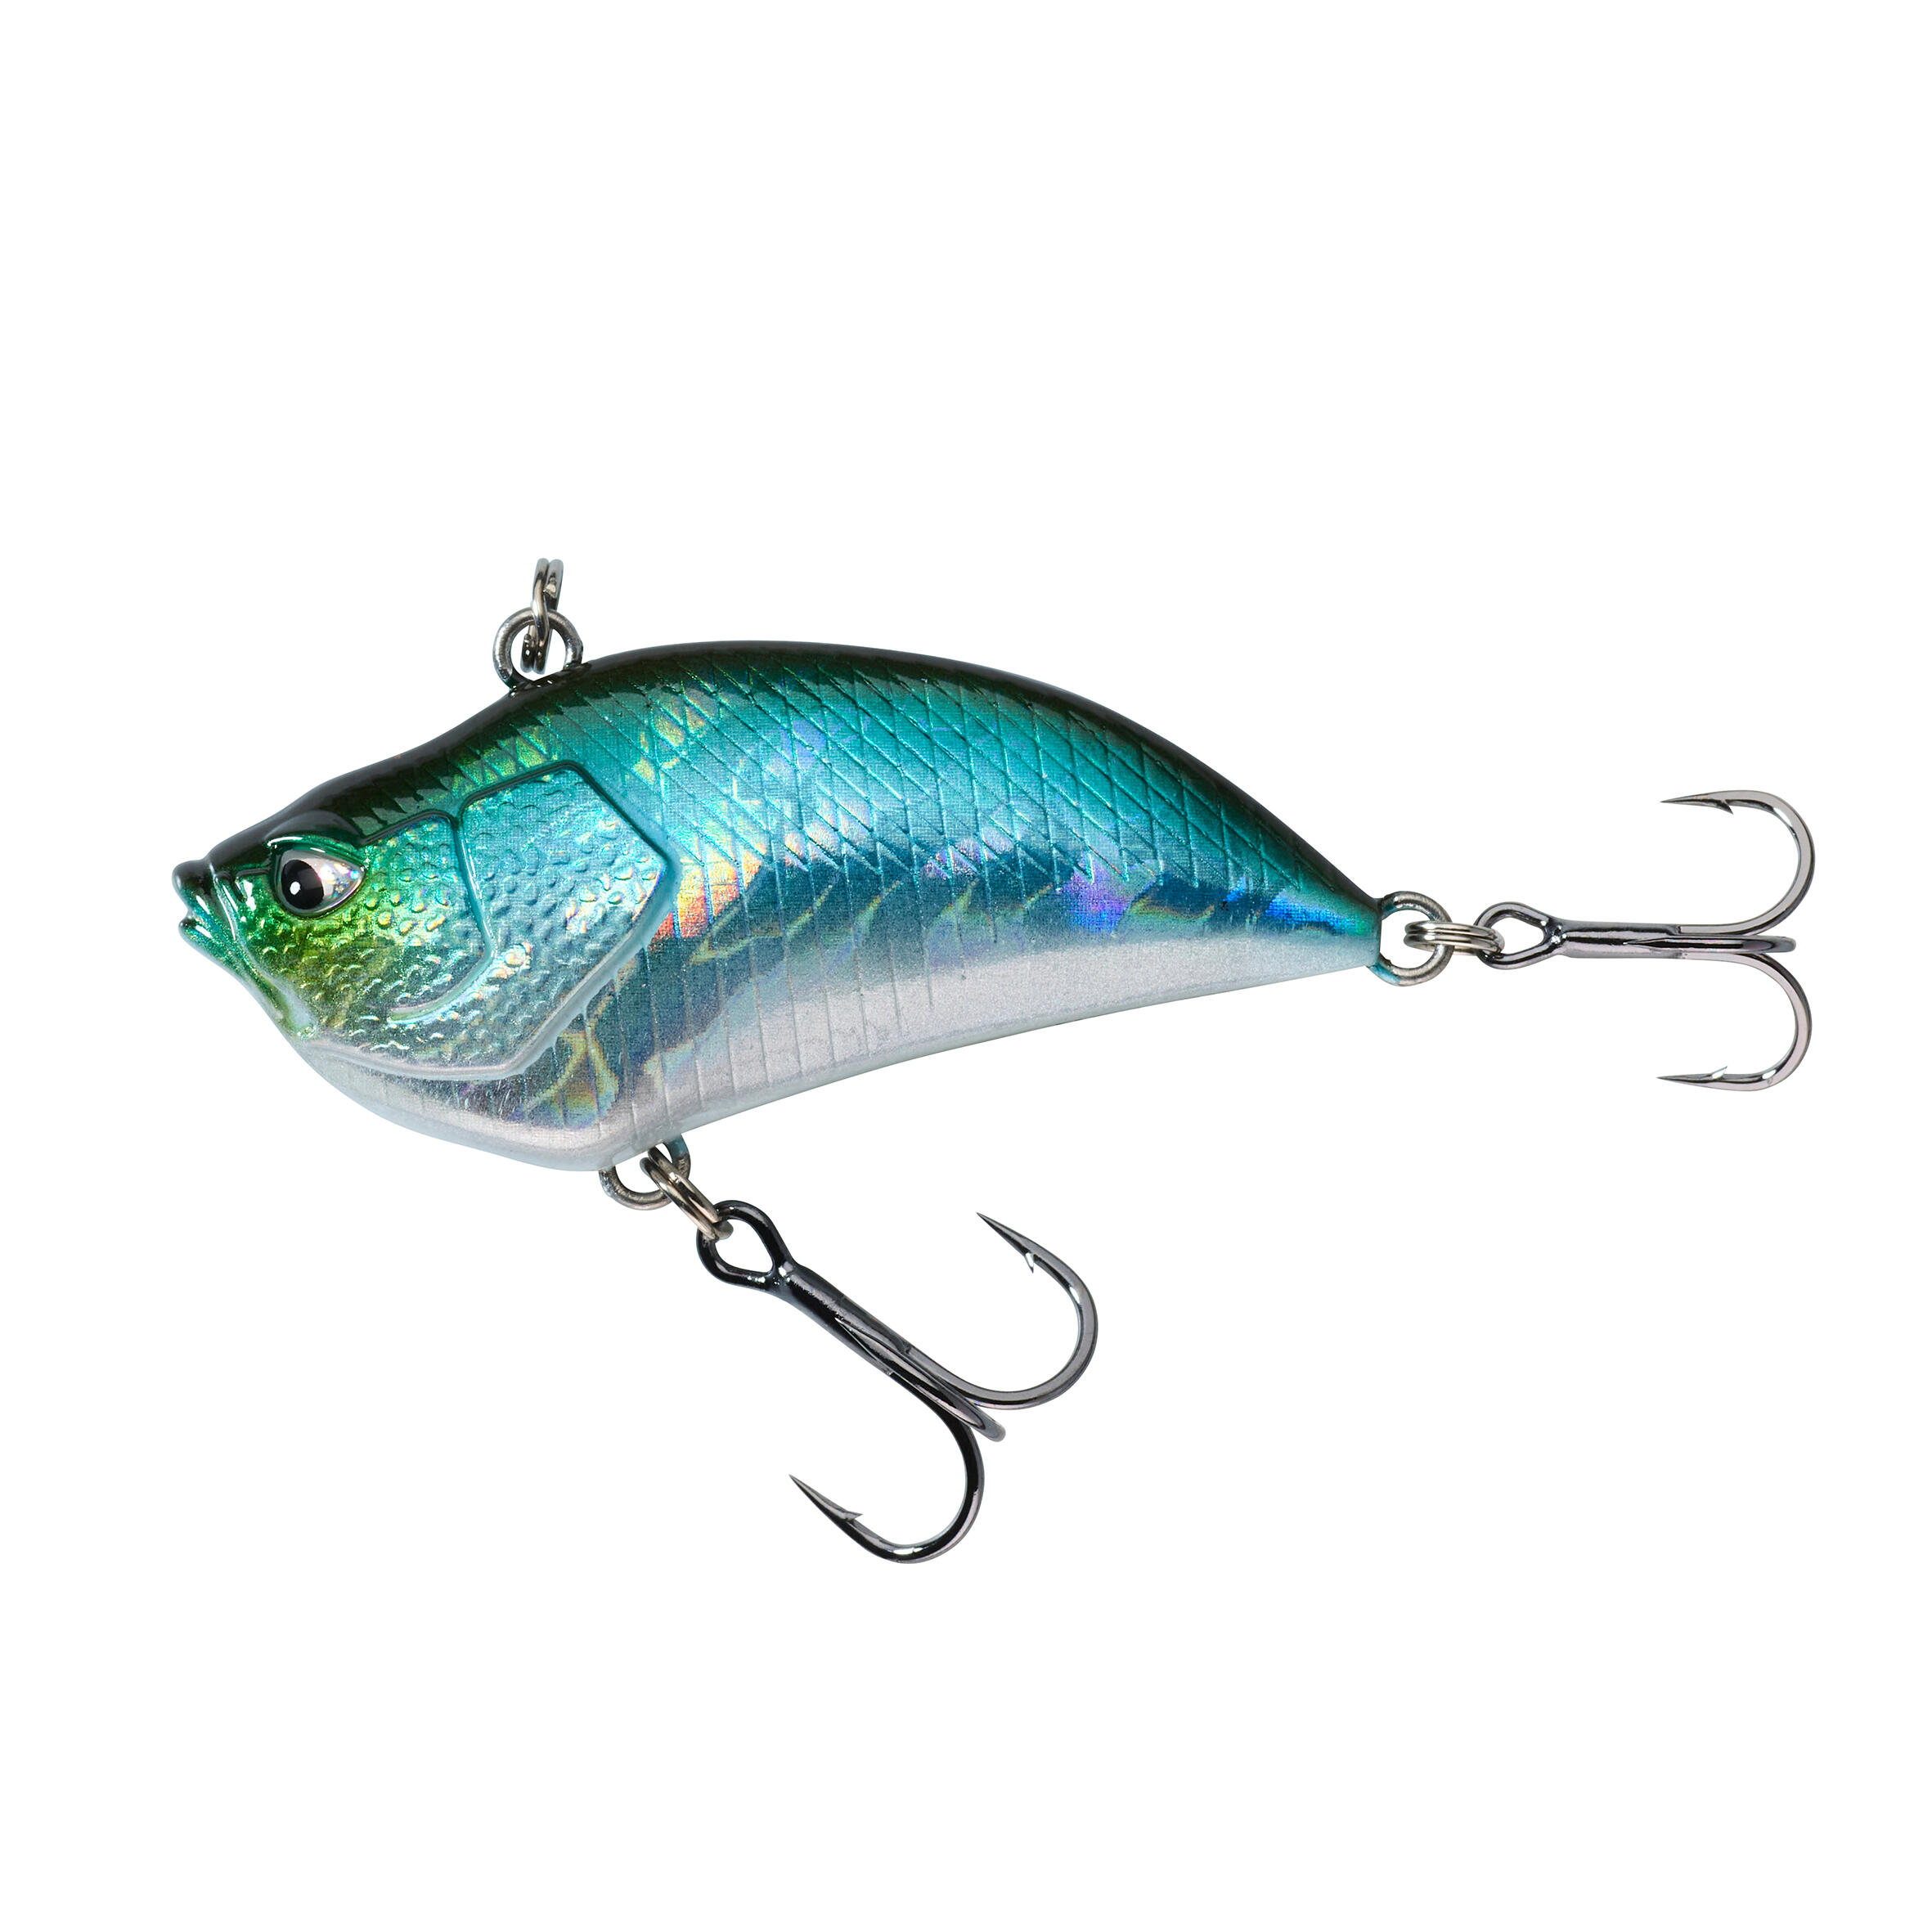 Image of PLUG BAIT LIPLESS LURE FISHING VBN 50 S DOS BLUE